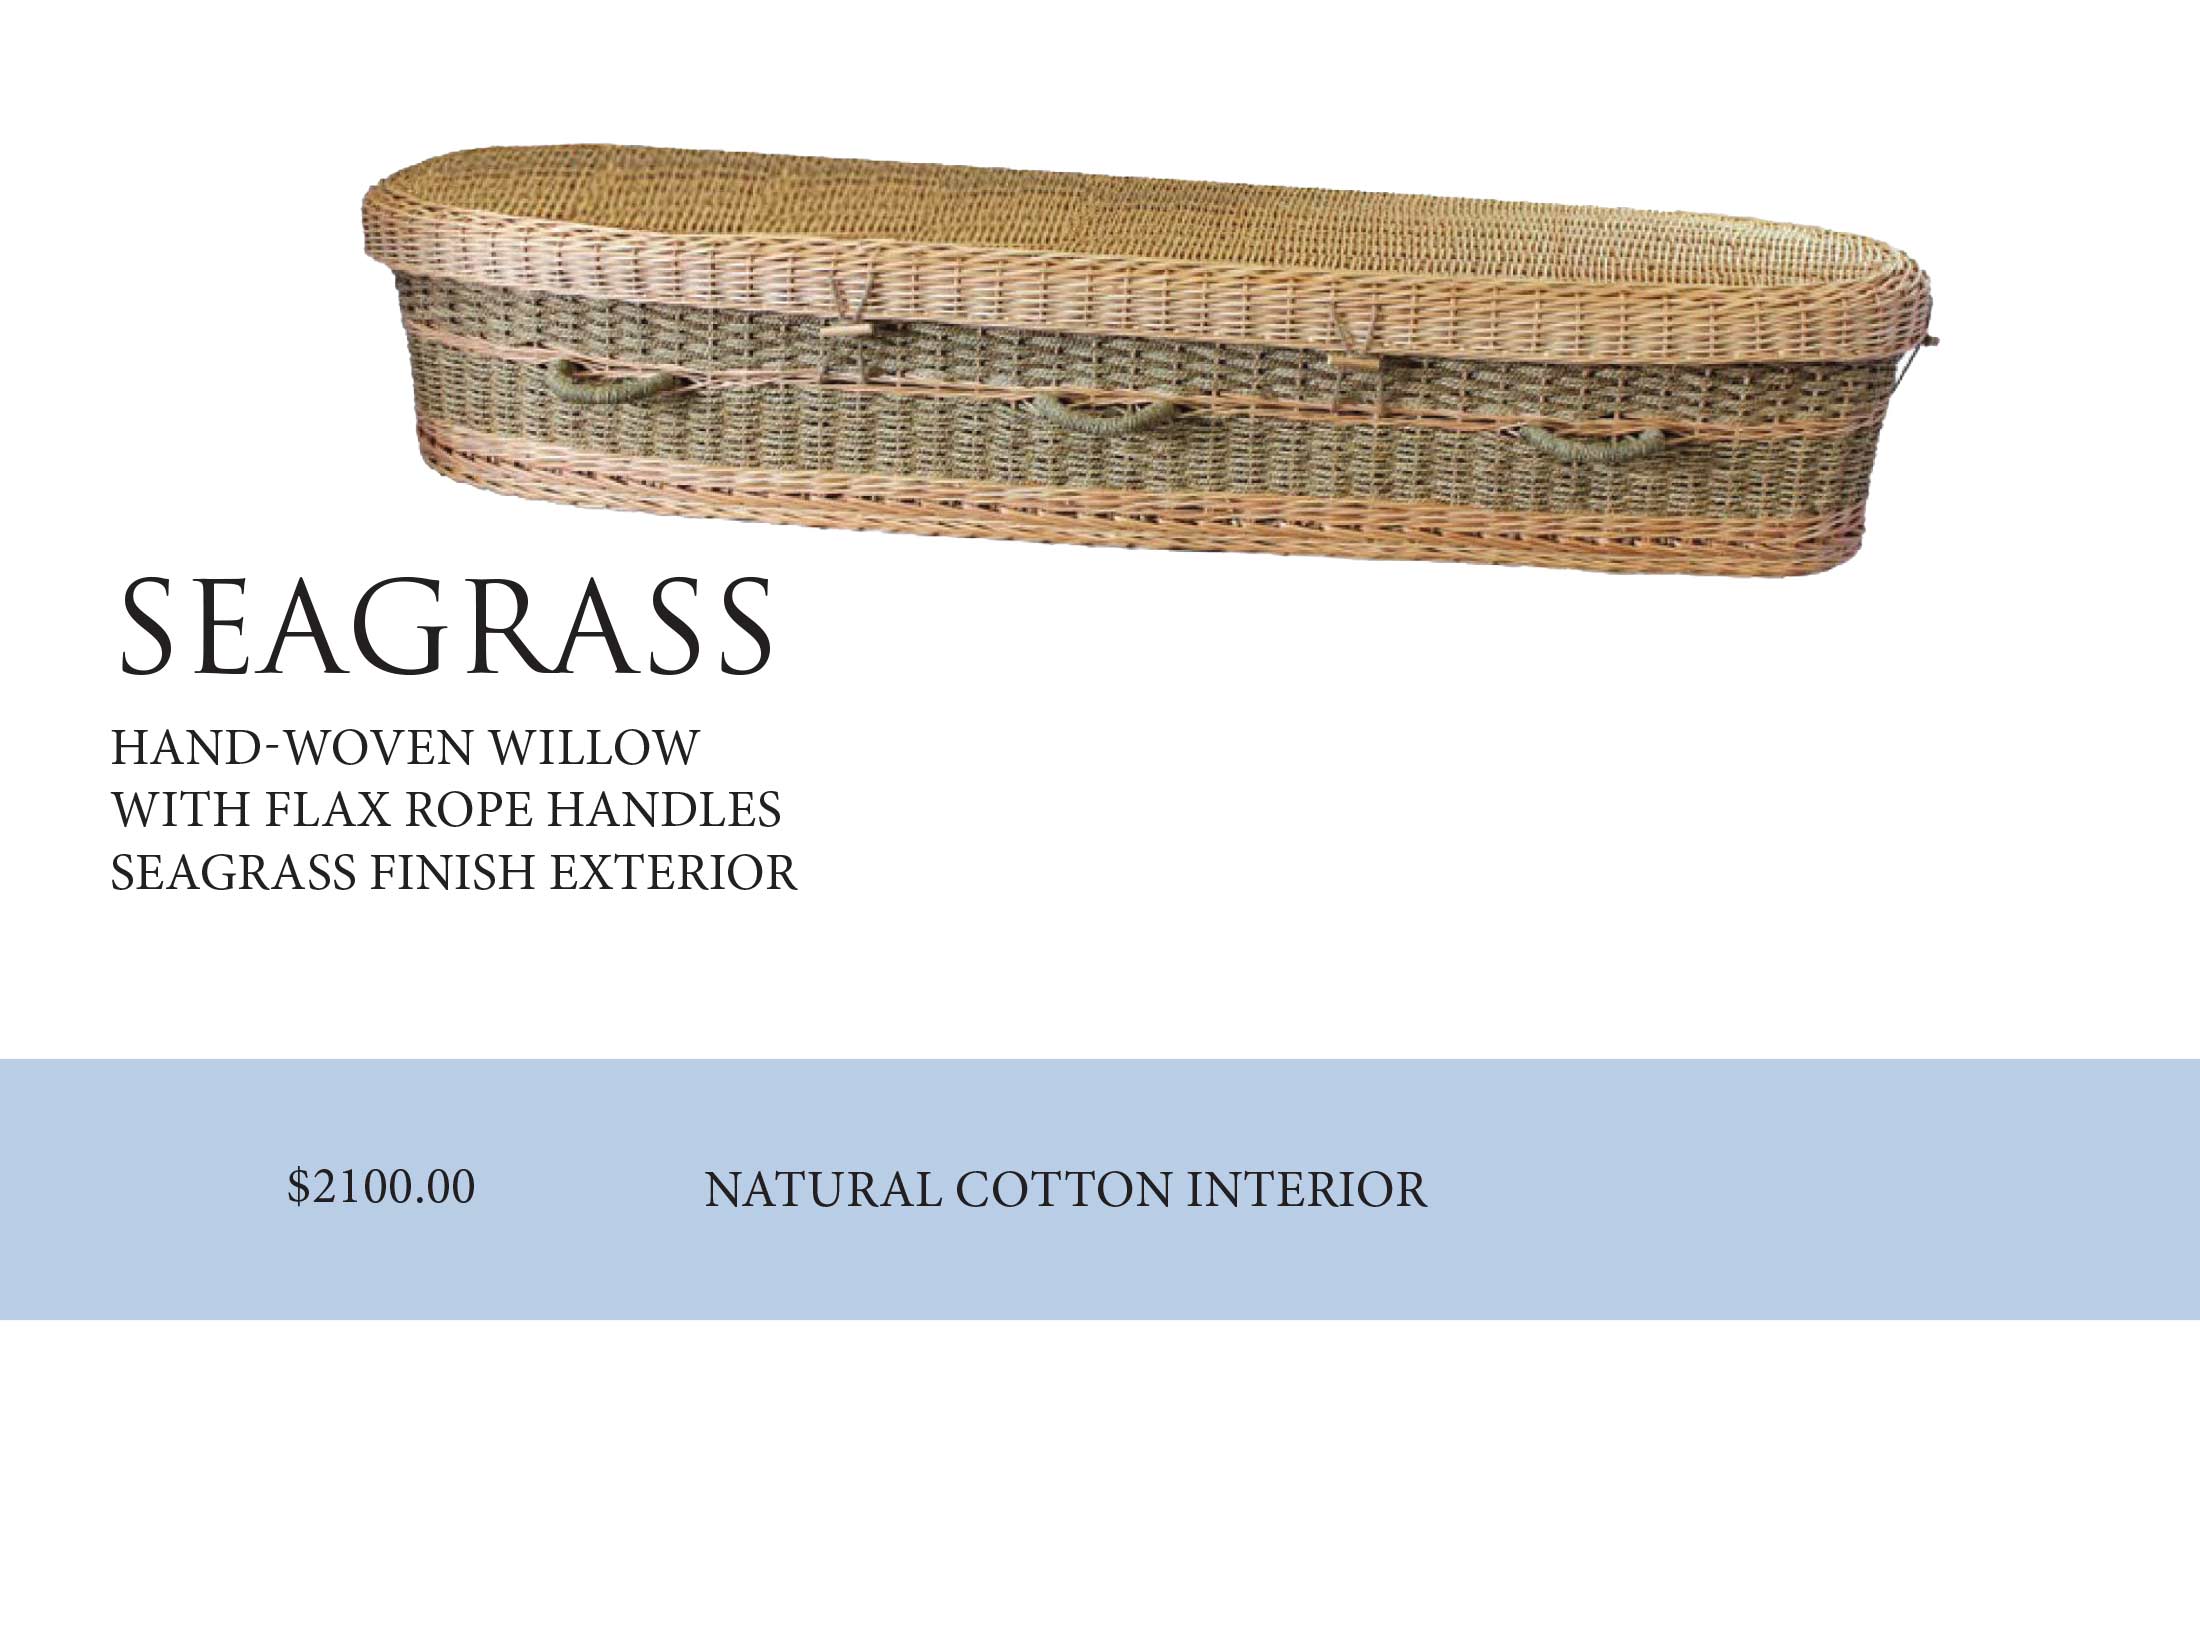 Seagrass - Hand-woven Willow With Flax Rope Handles Seagrass Finish Exterior - $2100.00 - Natural Cotton Interior